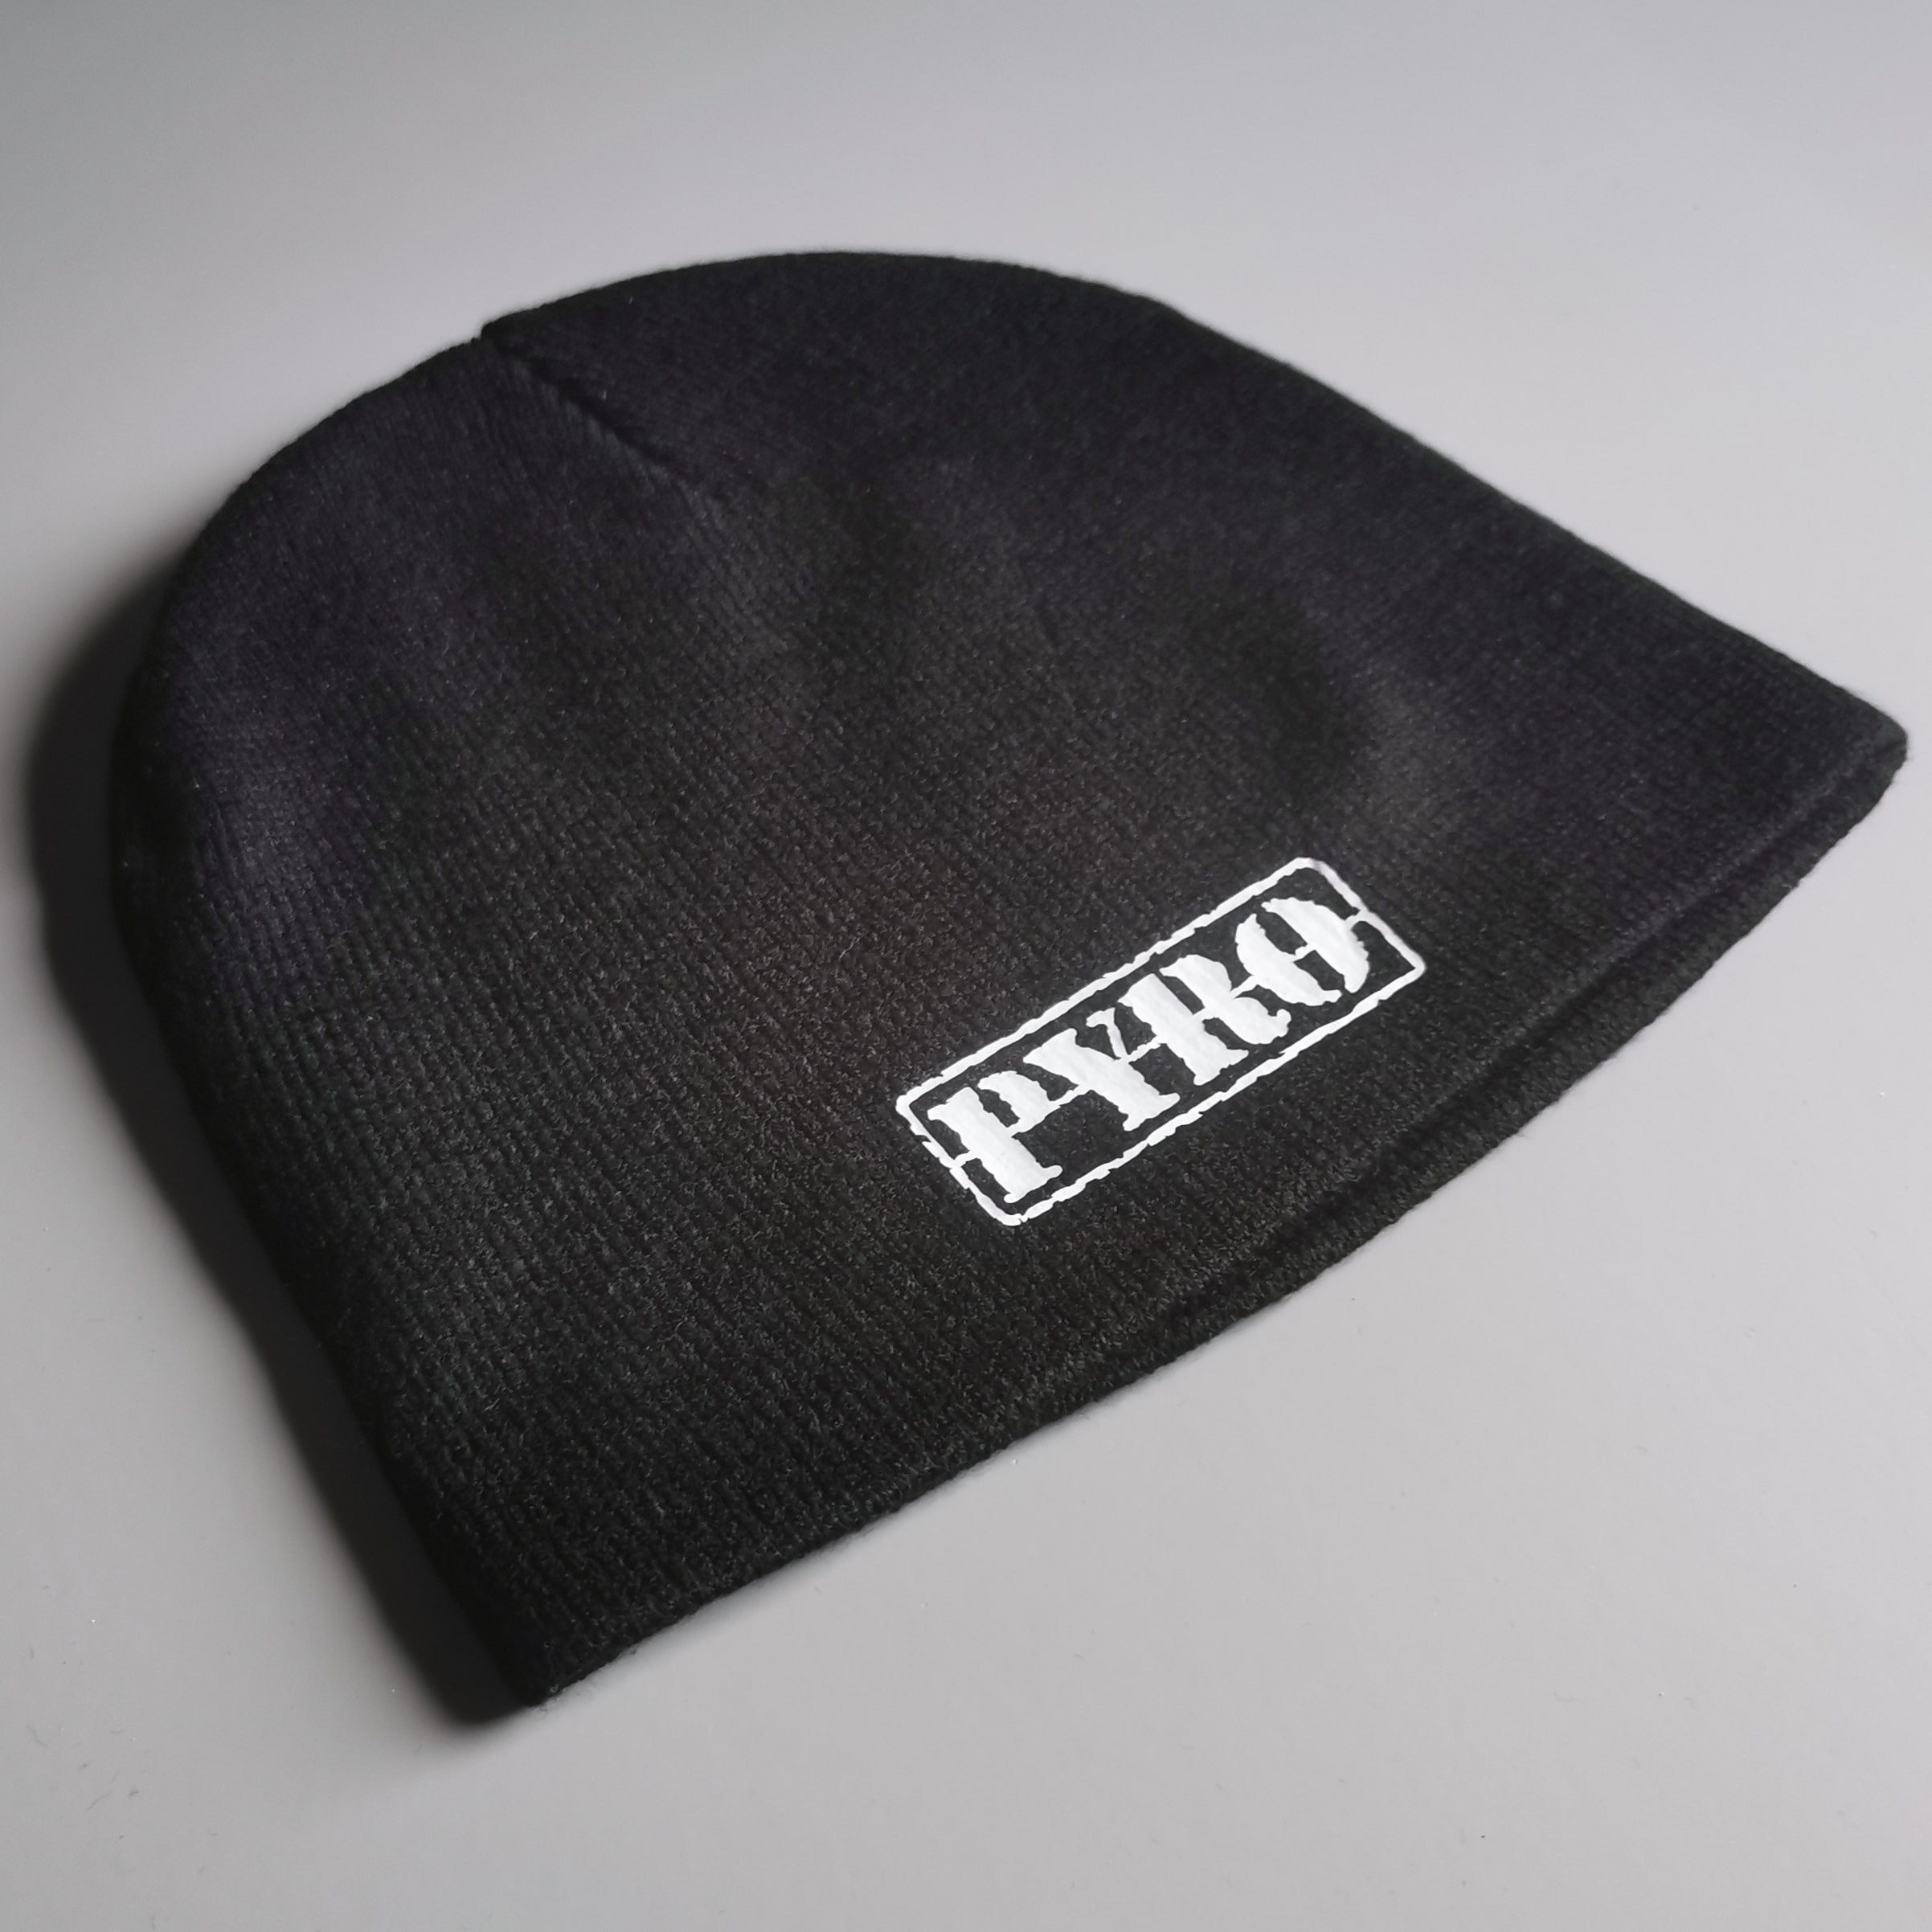 PYRO Beanie black (4 color options)